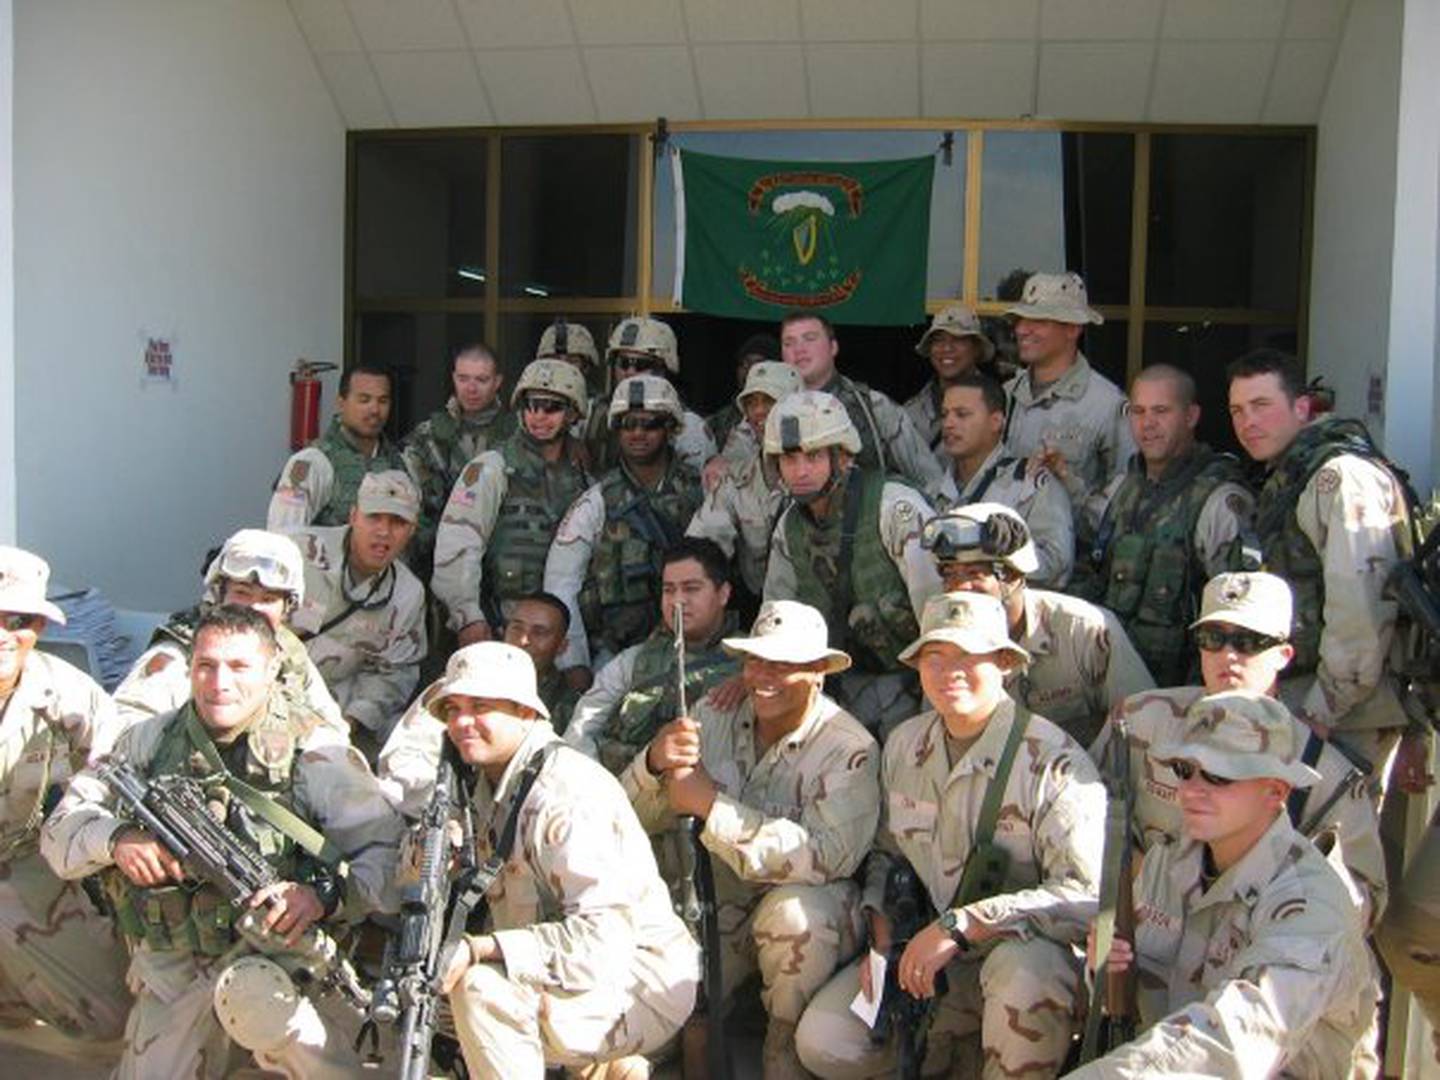 Combined New York Army National Guard unit at a memorial service for two New York soldiers who were killed in action, Baghdad, Iraq, December 2004.